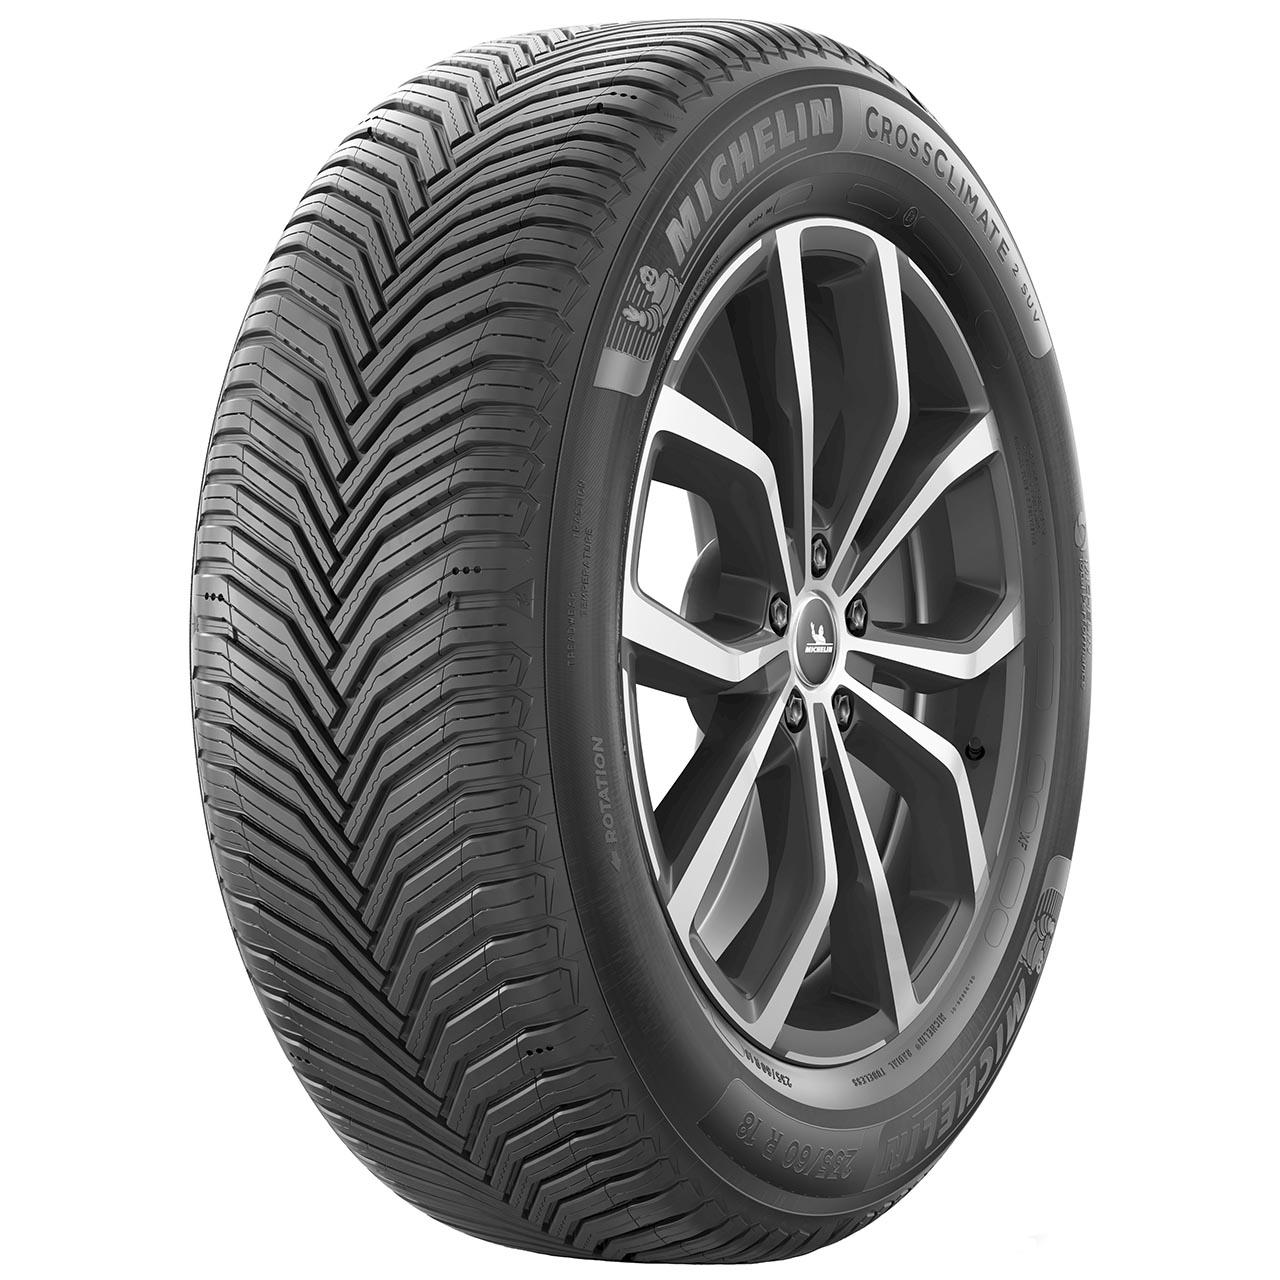 MICHELIN CROSSCLIMATE 2 SUV 225/65R17 102H BSW